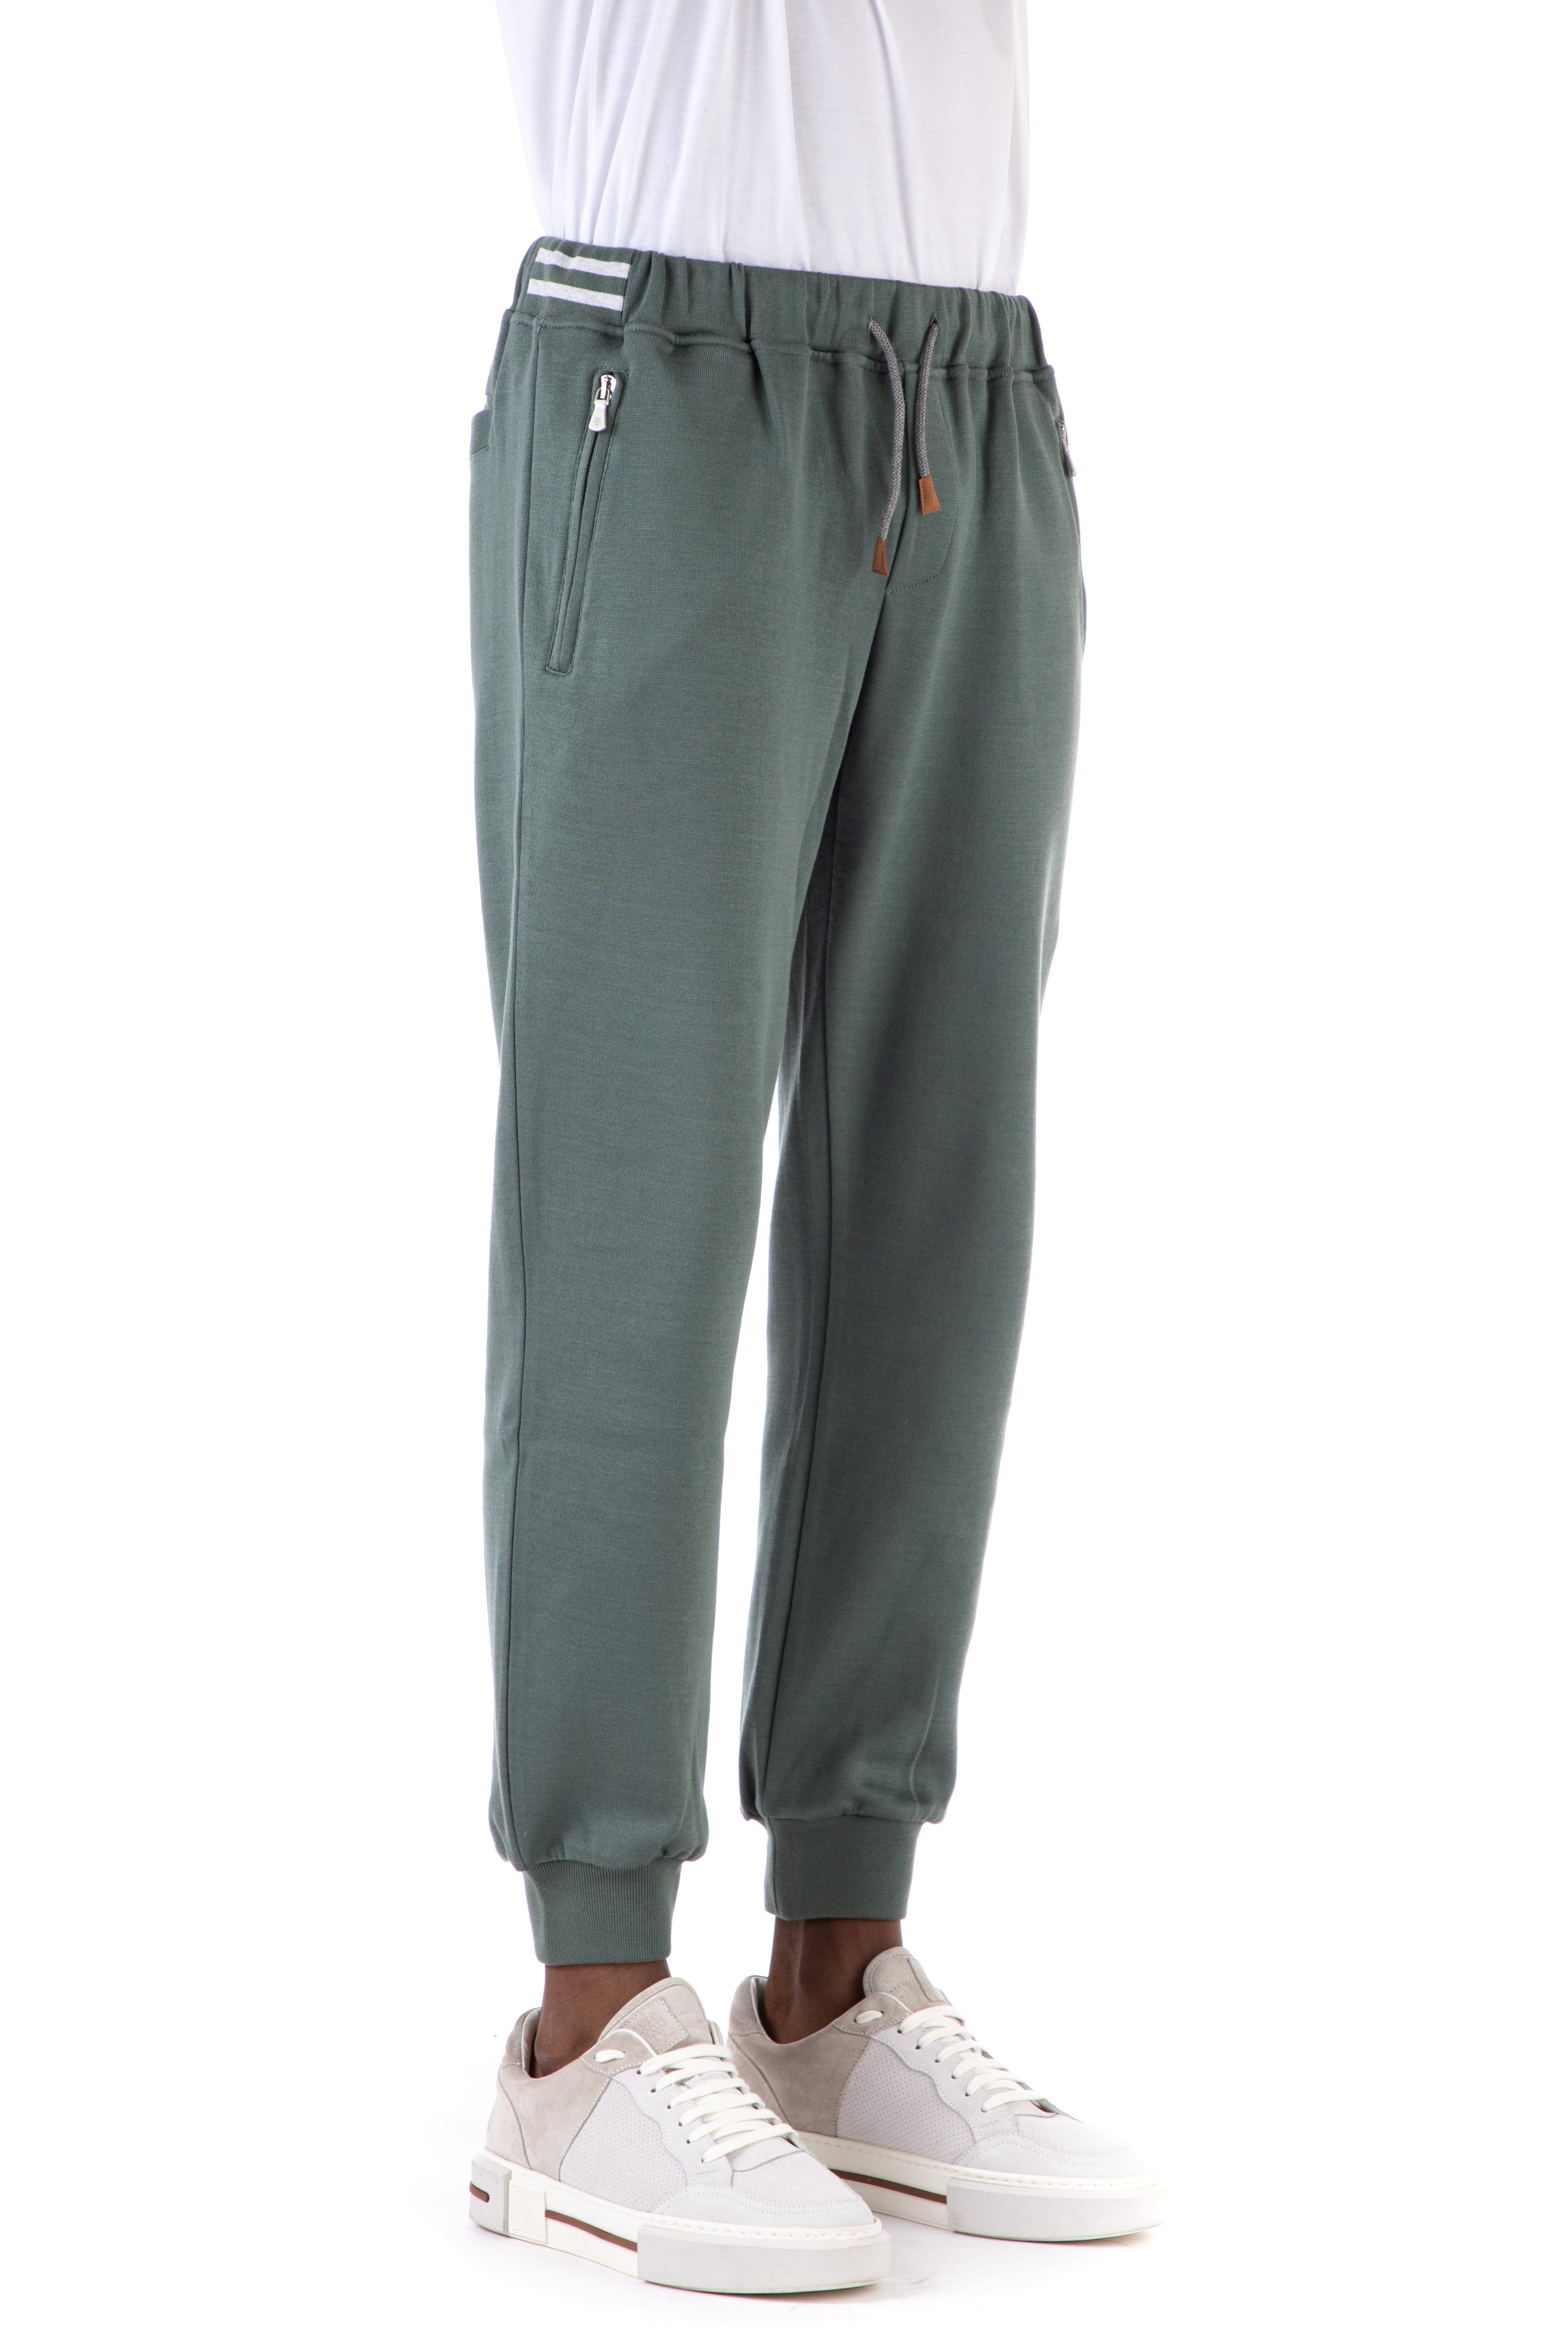 Cotton sweatpants with contrasting bands